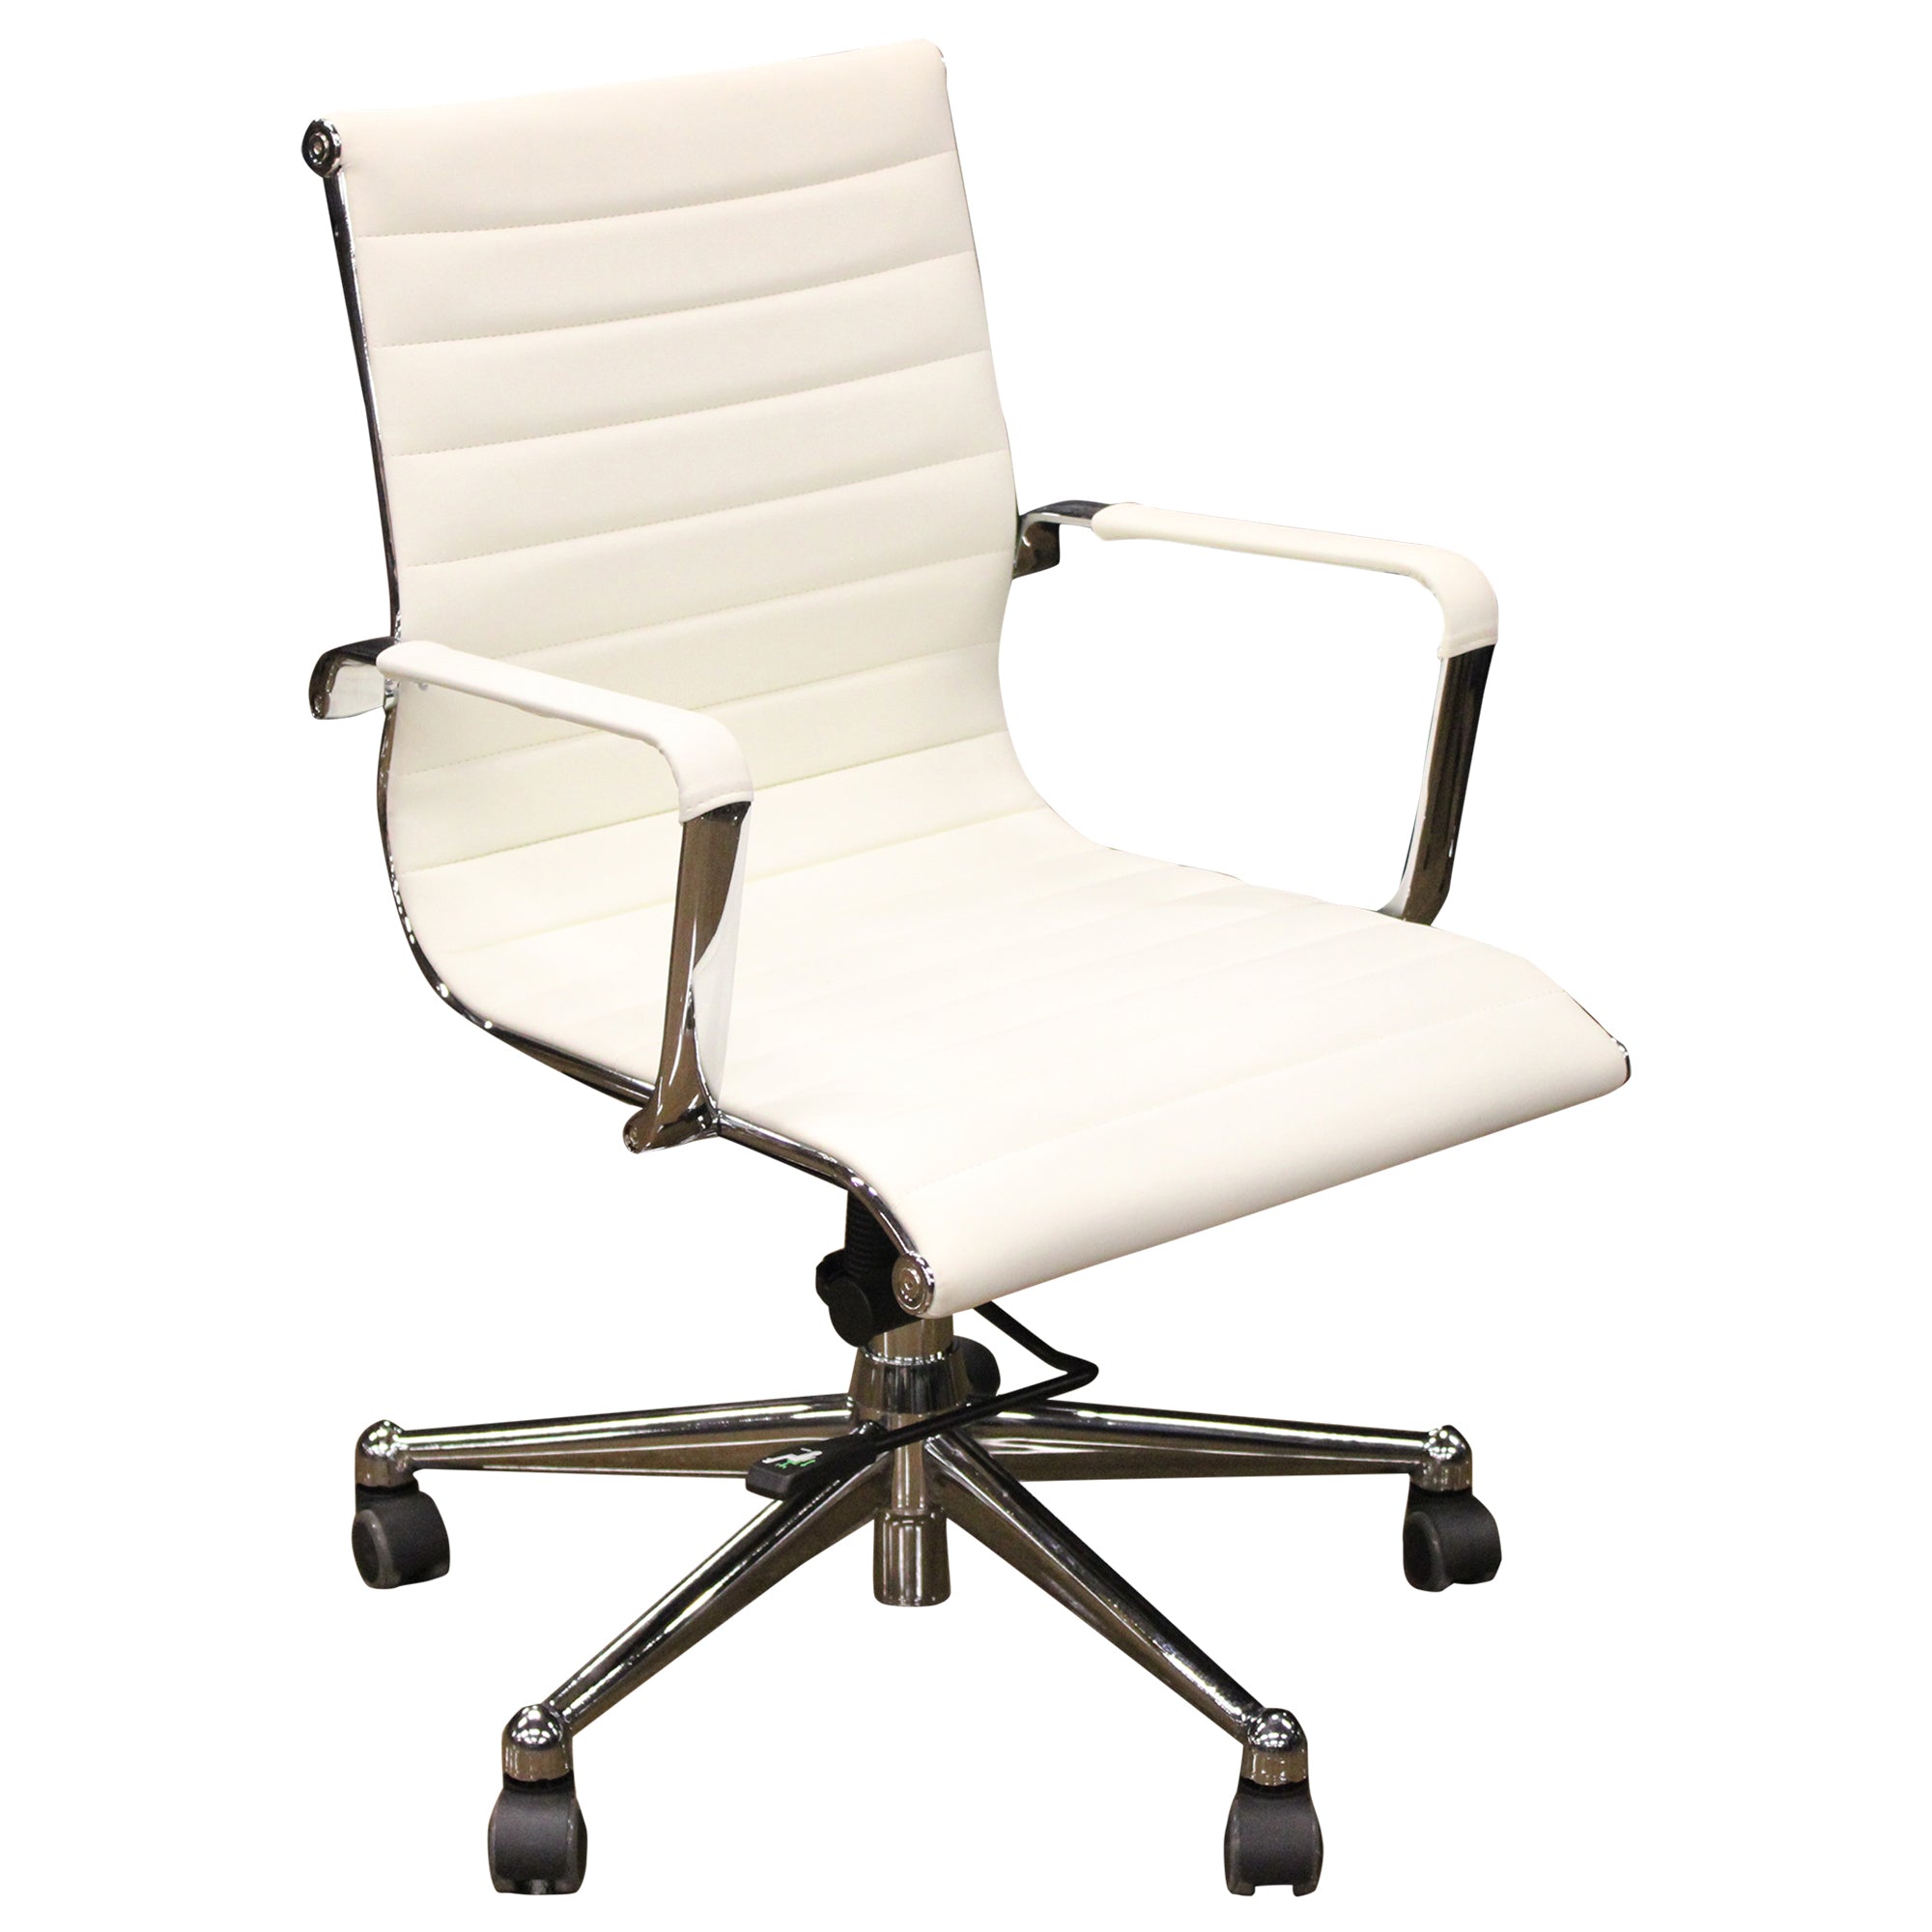 Kimball Alumma Conference Chair, White - Preowned